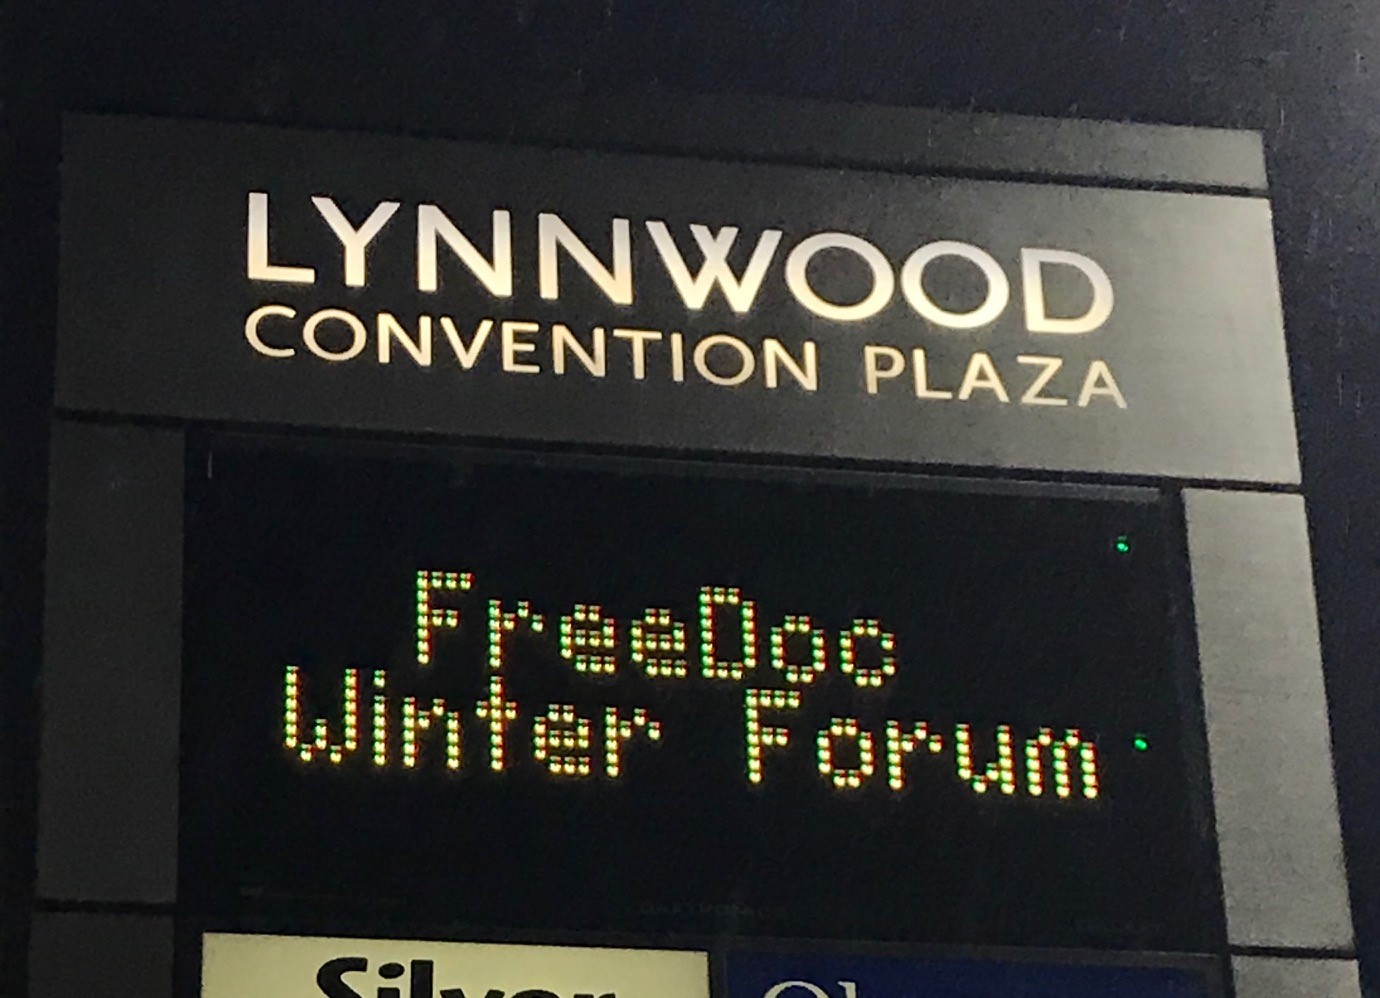 Getting ready to open Winter Forum